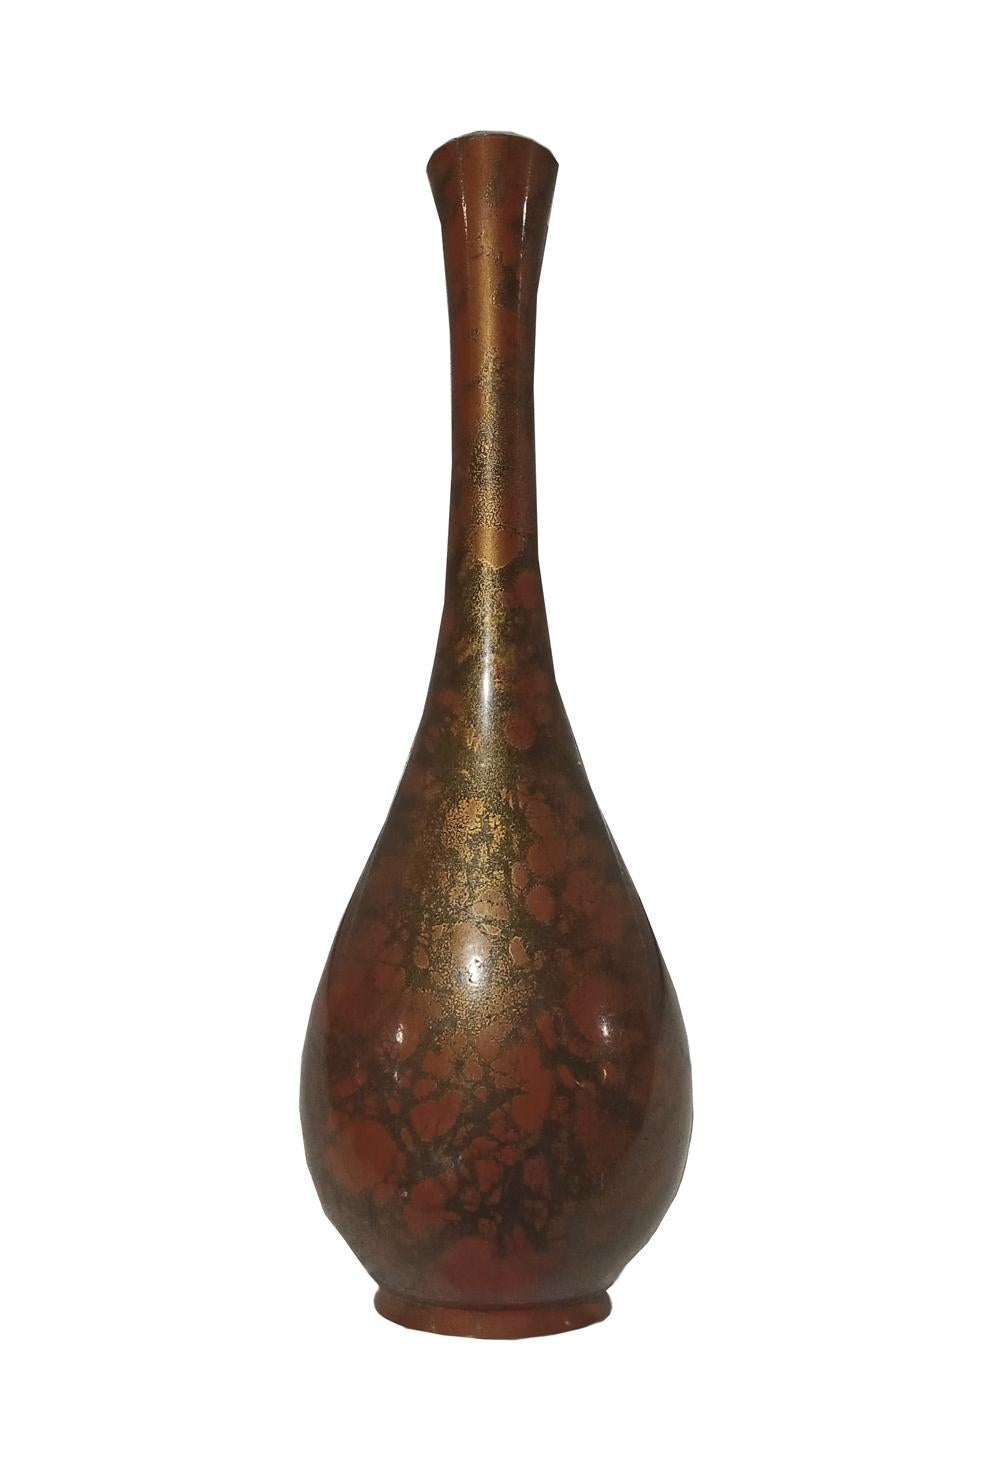 A fabulous Ikebana brass vase, hand-crafted in Japan, Showa Period. Oval shape. The finish is Murashido, a centuries-old technique that consists in dipping the cast brass in hot oil and smoke it with rice straw, which gives the metal its beautiful